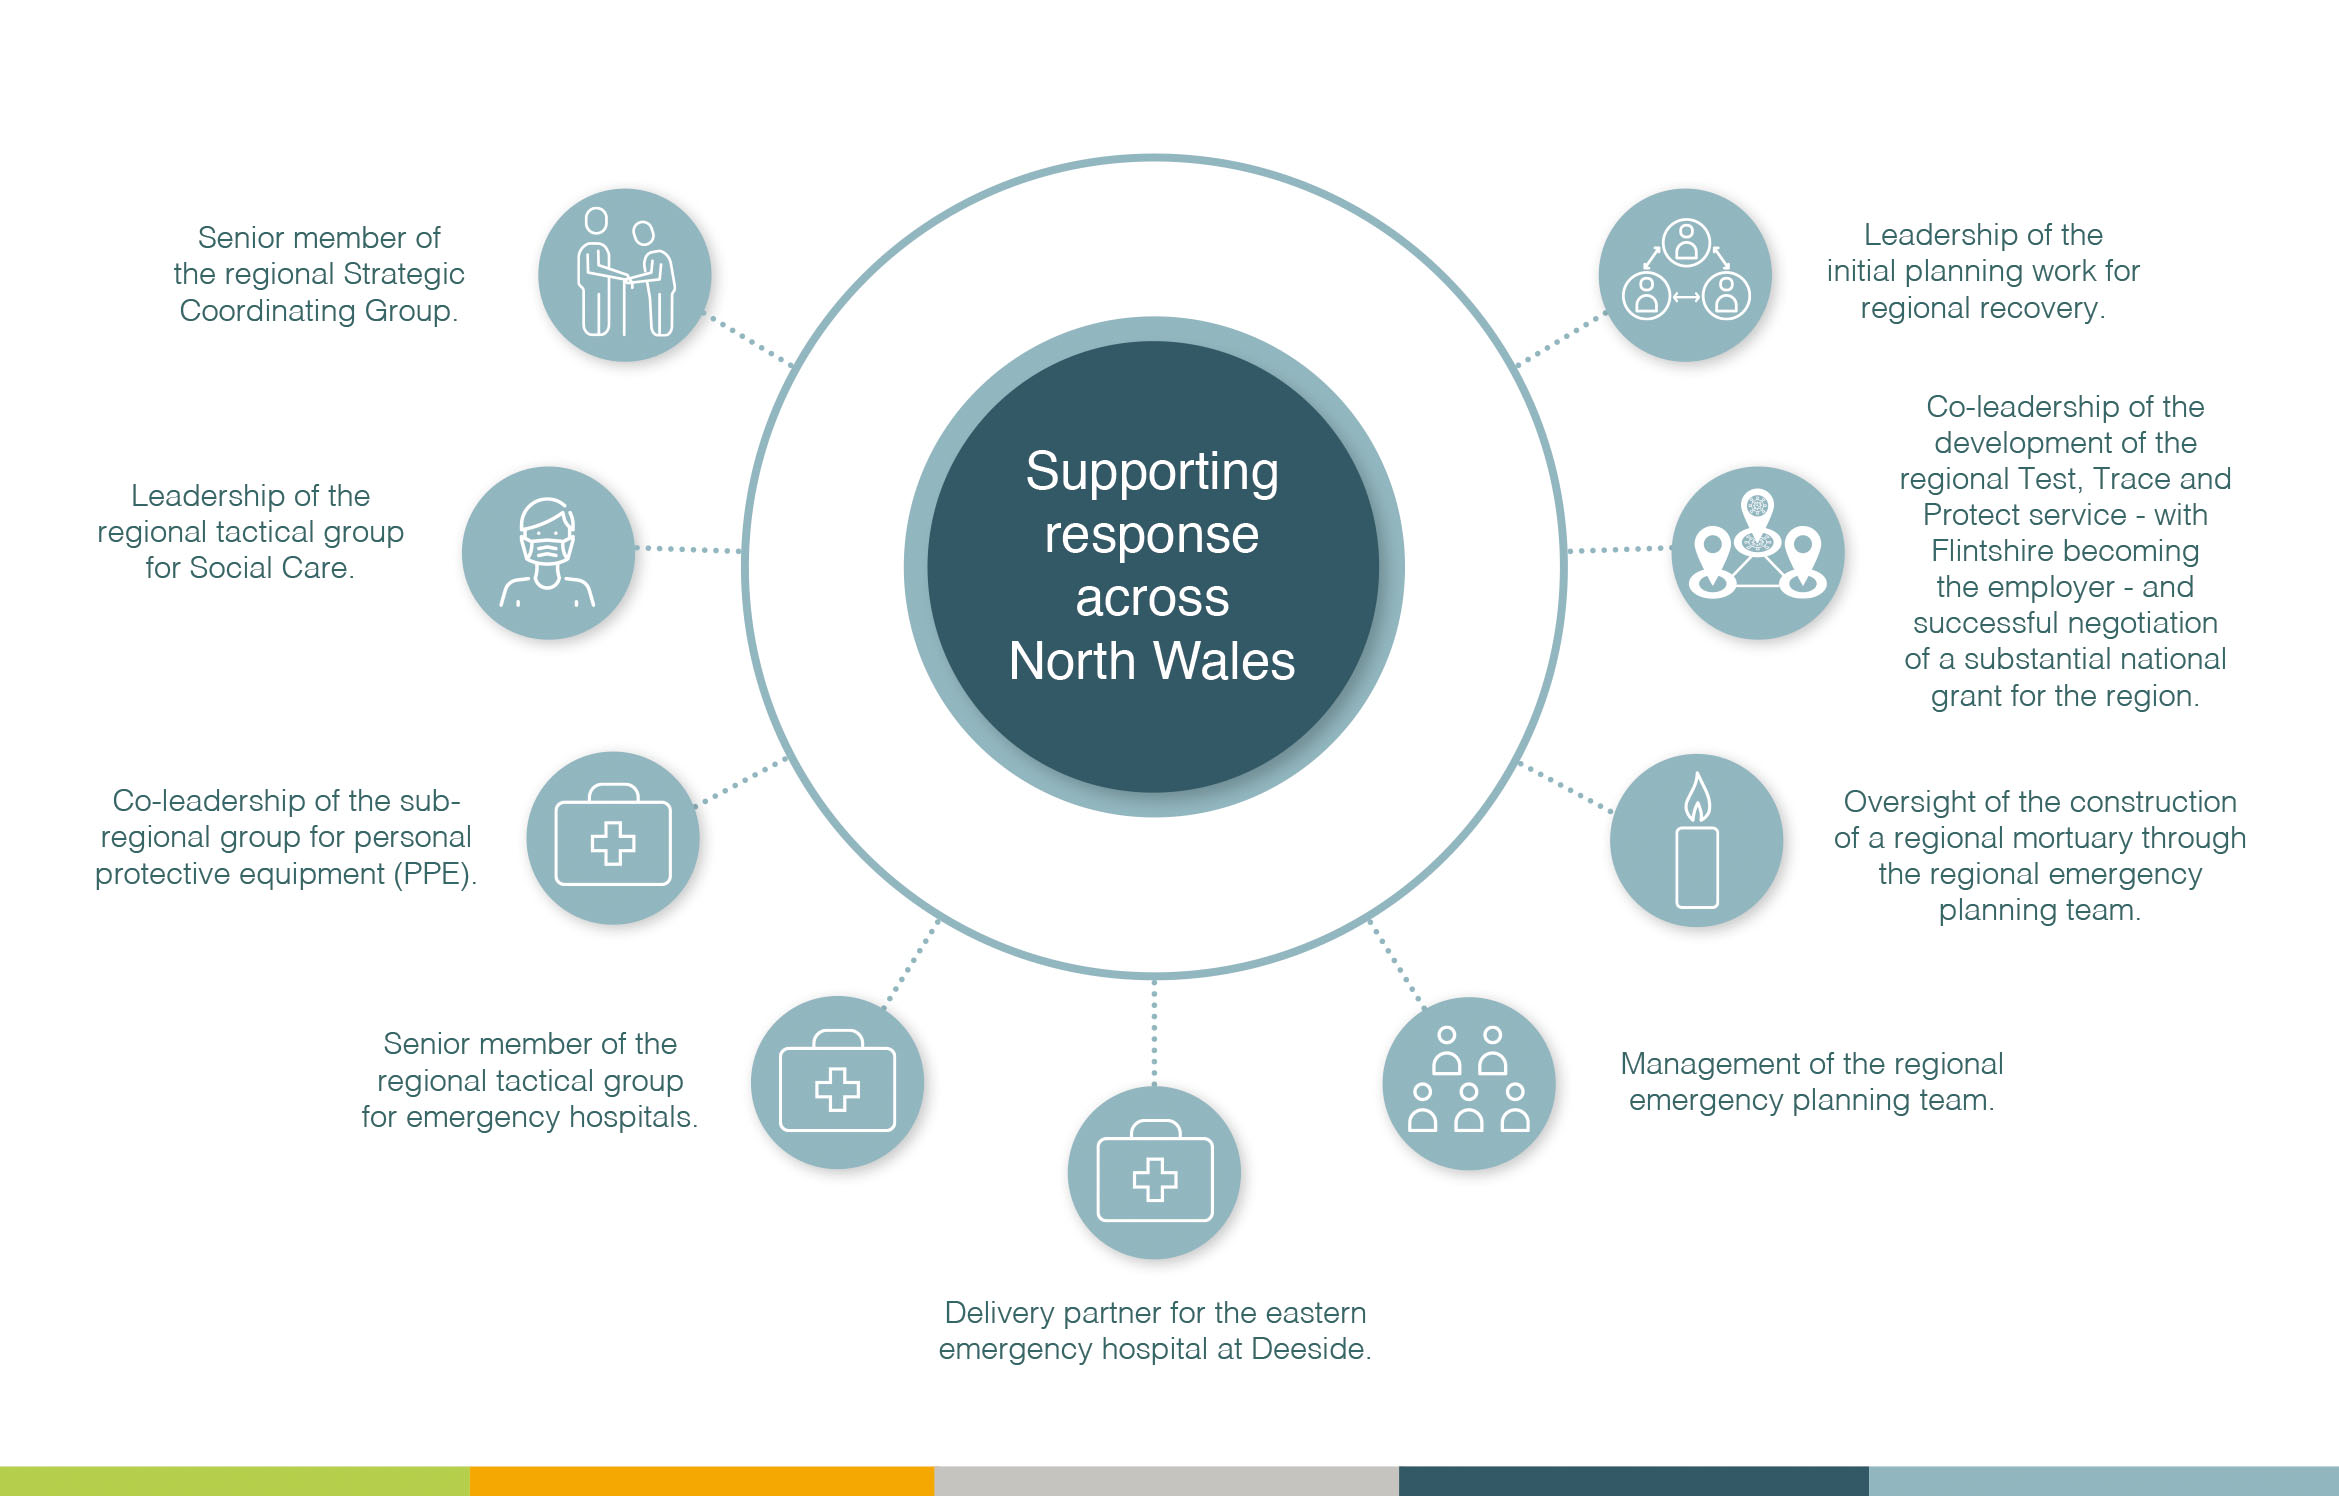 Supporting the region - examples of work during COVID-19